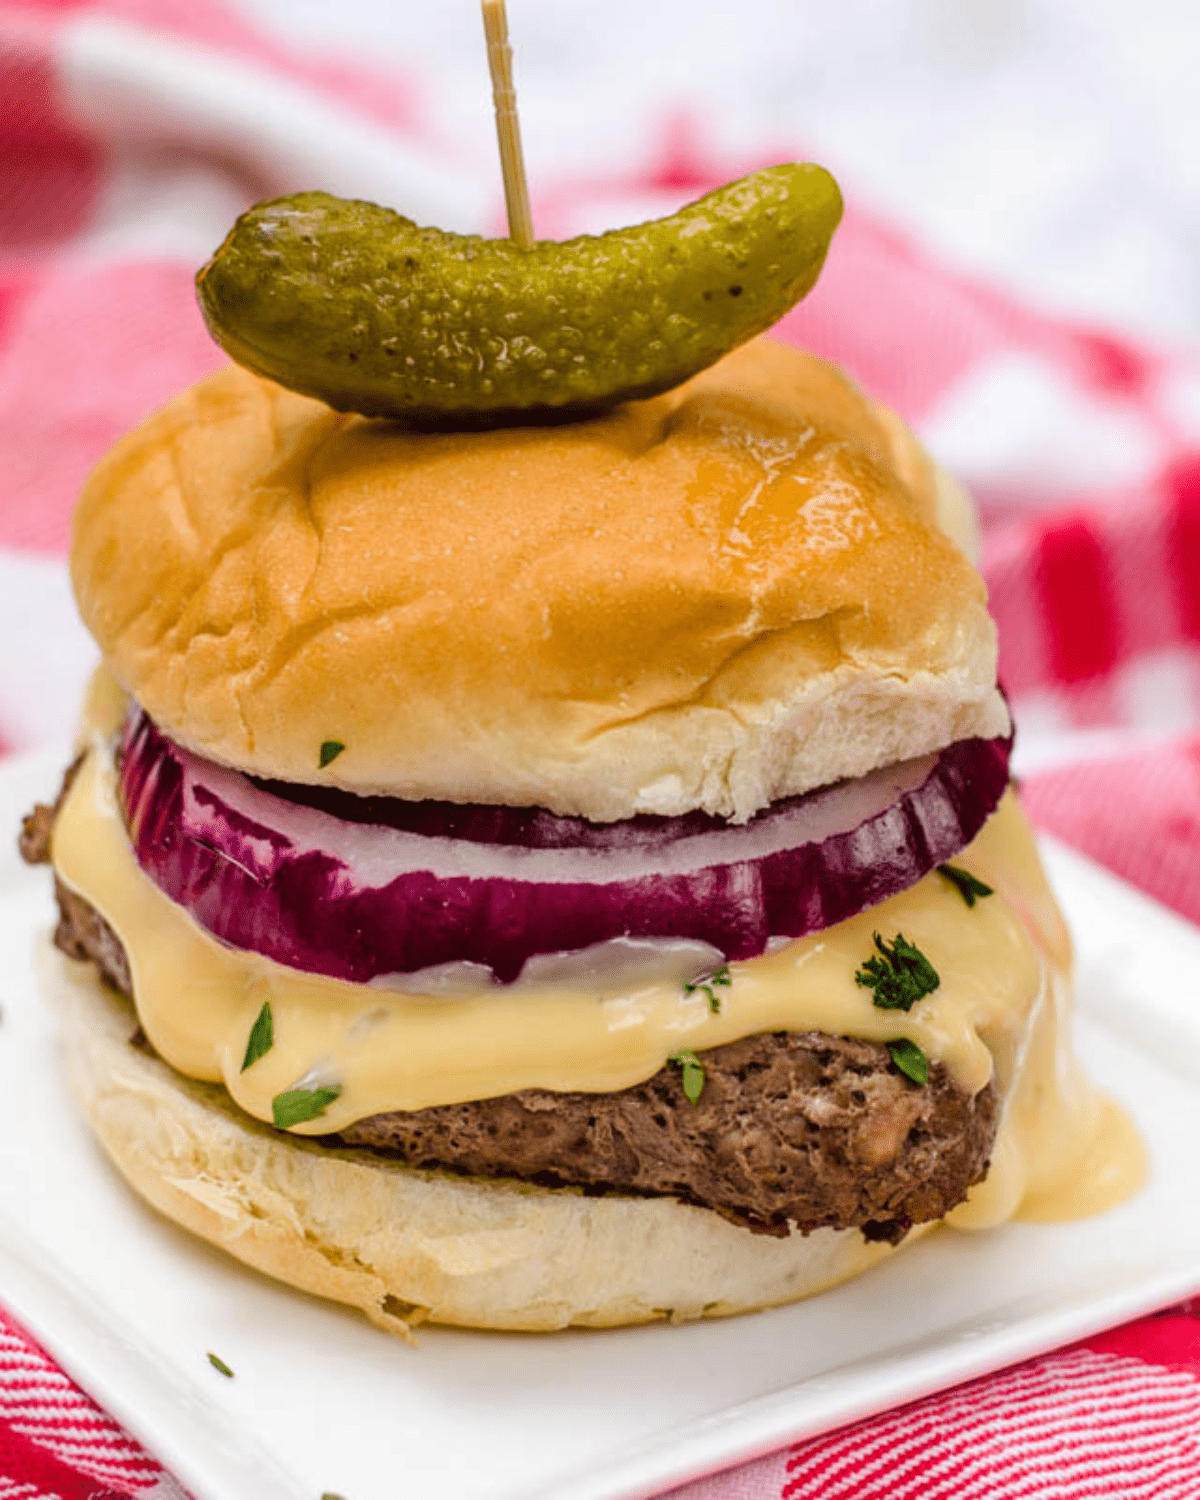 Burger on a bun with red onion, pickles and cheese